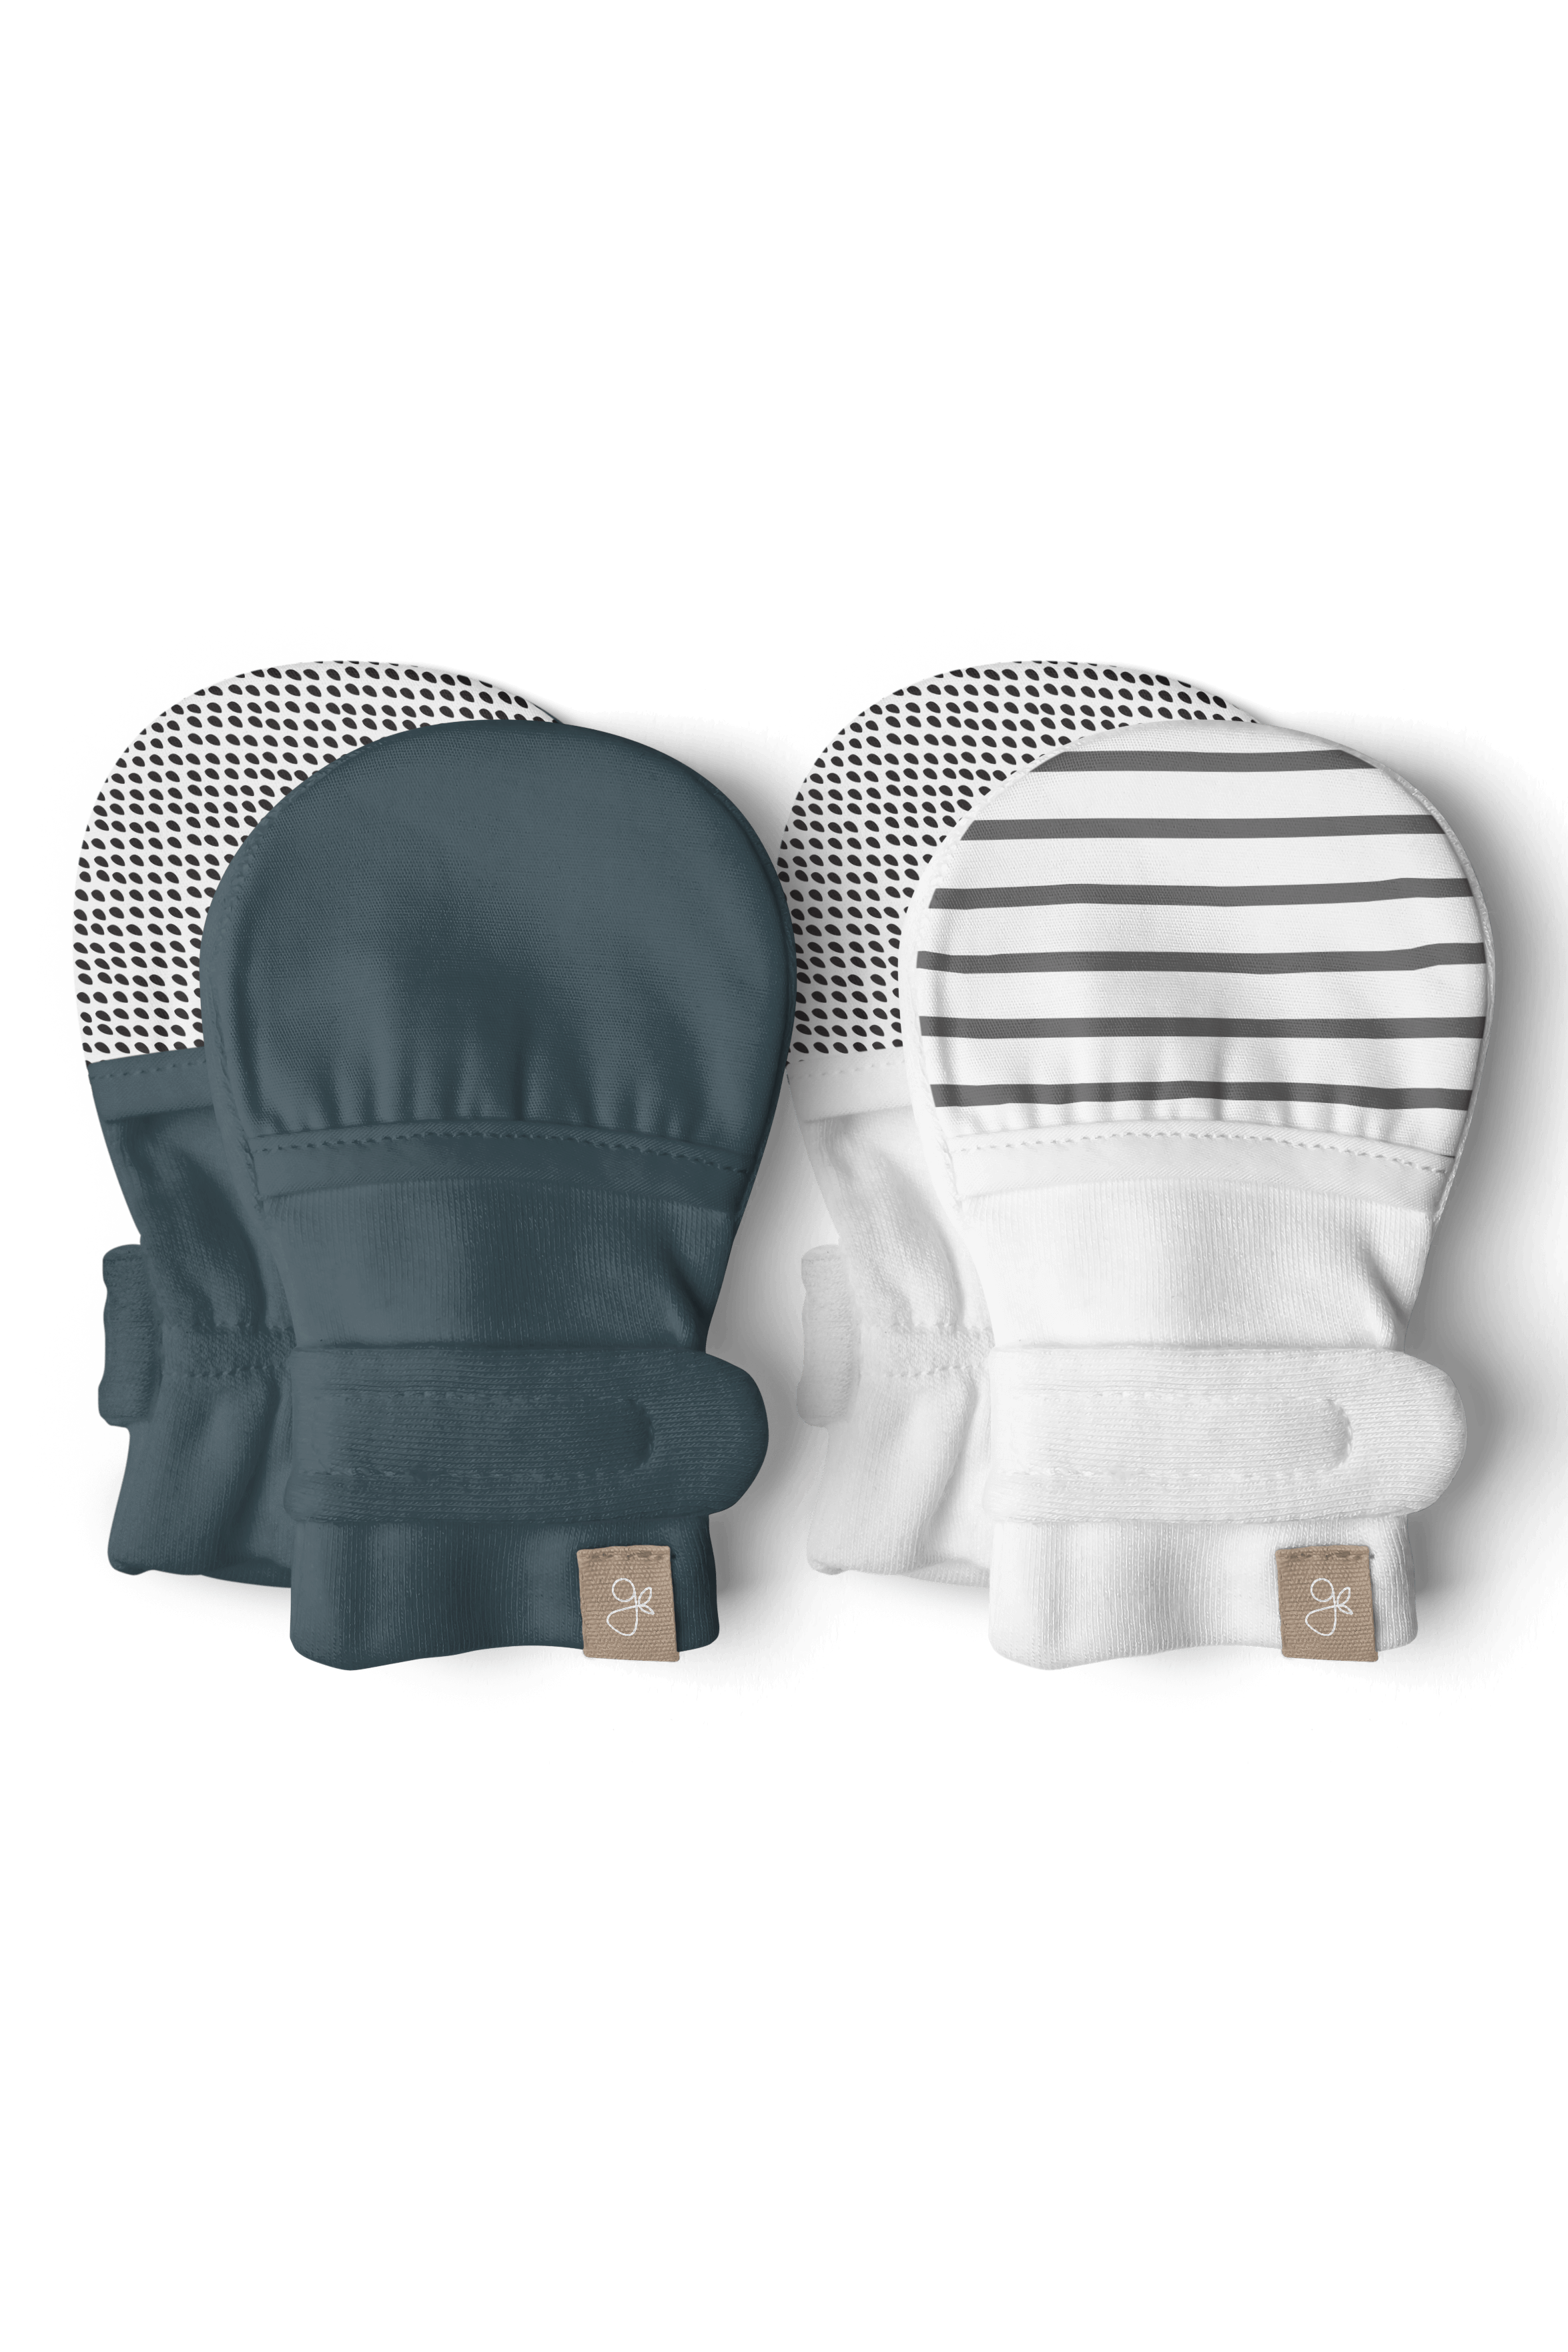 STAY ON 2-PACK MITTS | STRIPE GRAY + MIDNIGHT